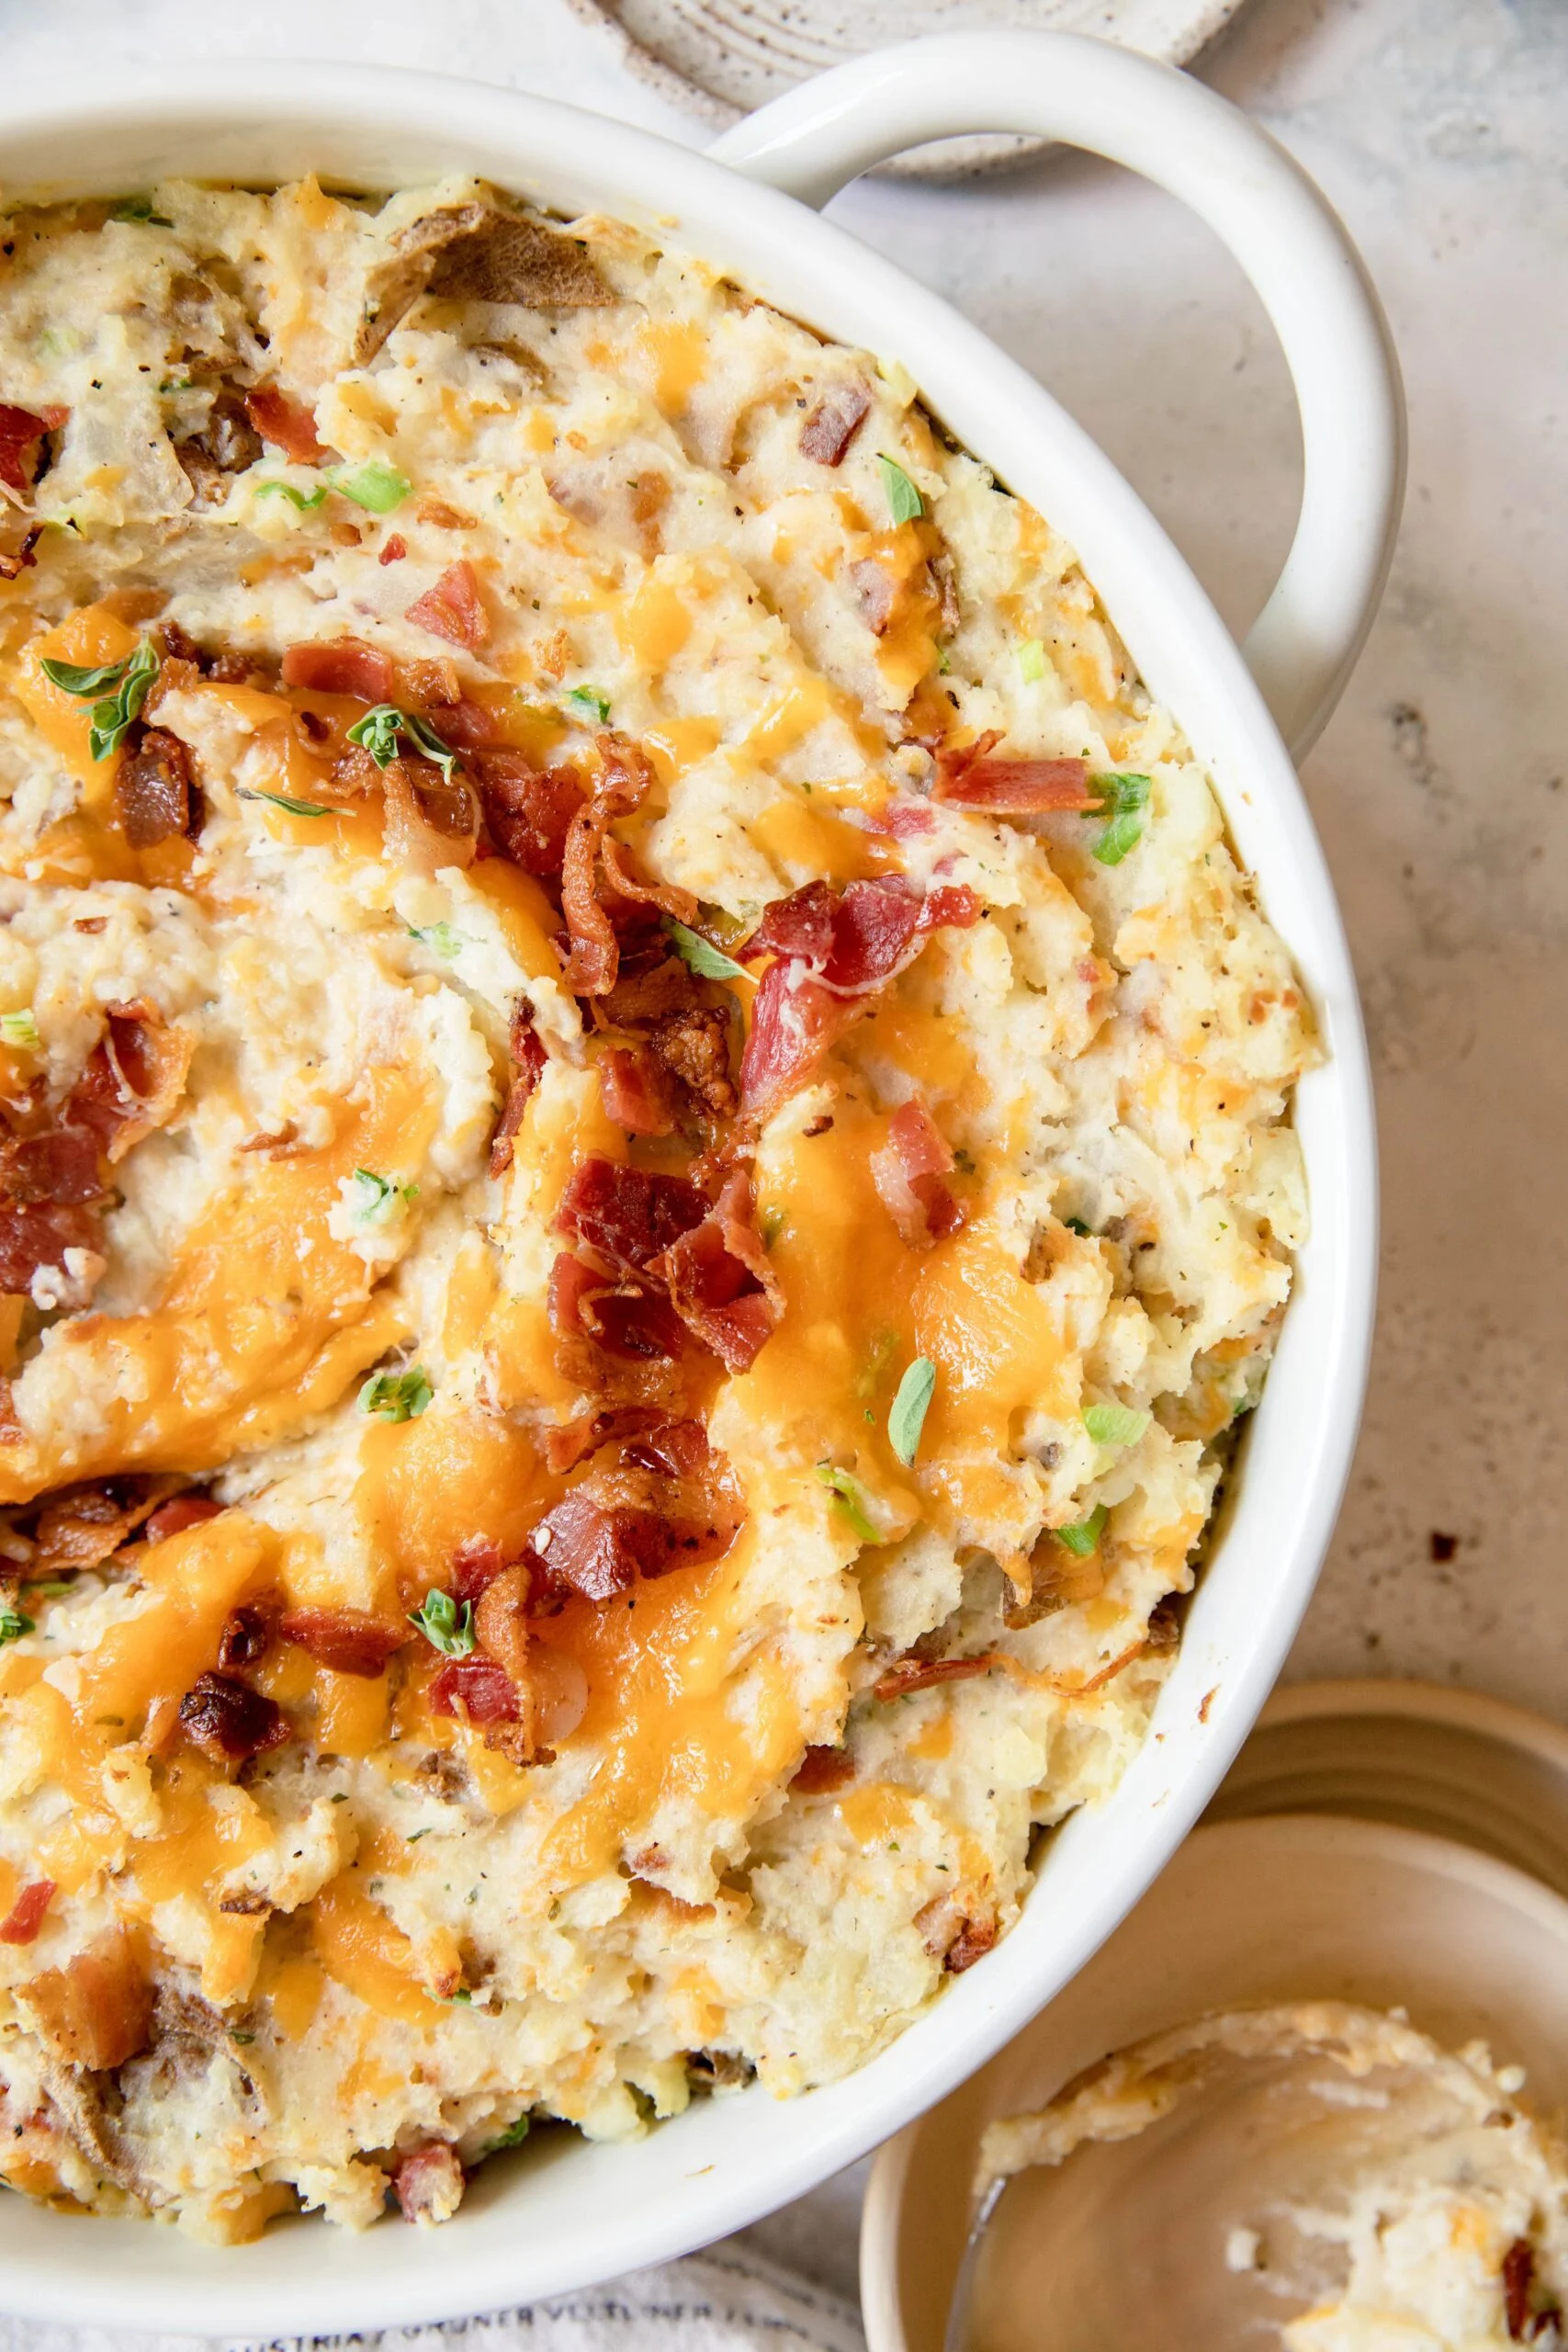 Loaded mashed potatoes with bacon, cheese, and herbs in a white baking dish.